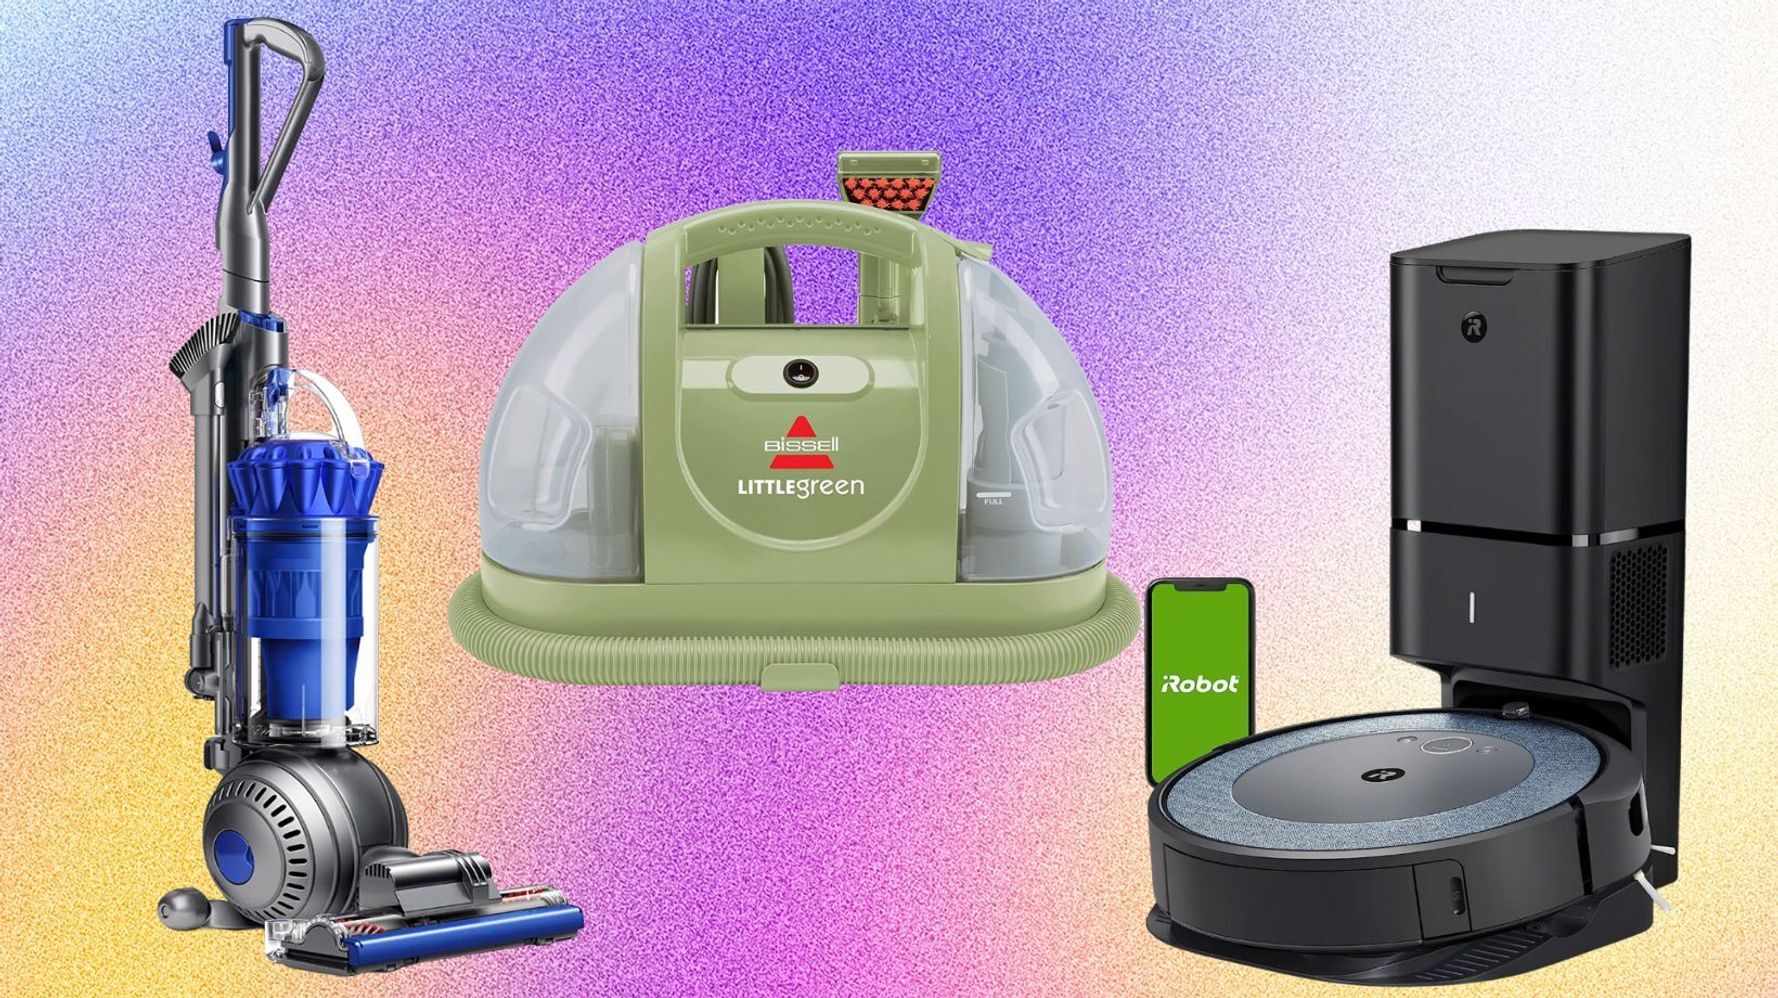 Shoppers Say This Shark Stick Vacuum Is a 'Breeze' to Use, and It's 48% Off